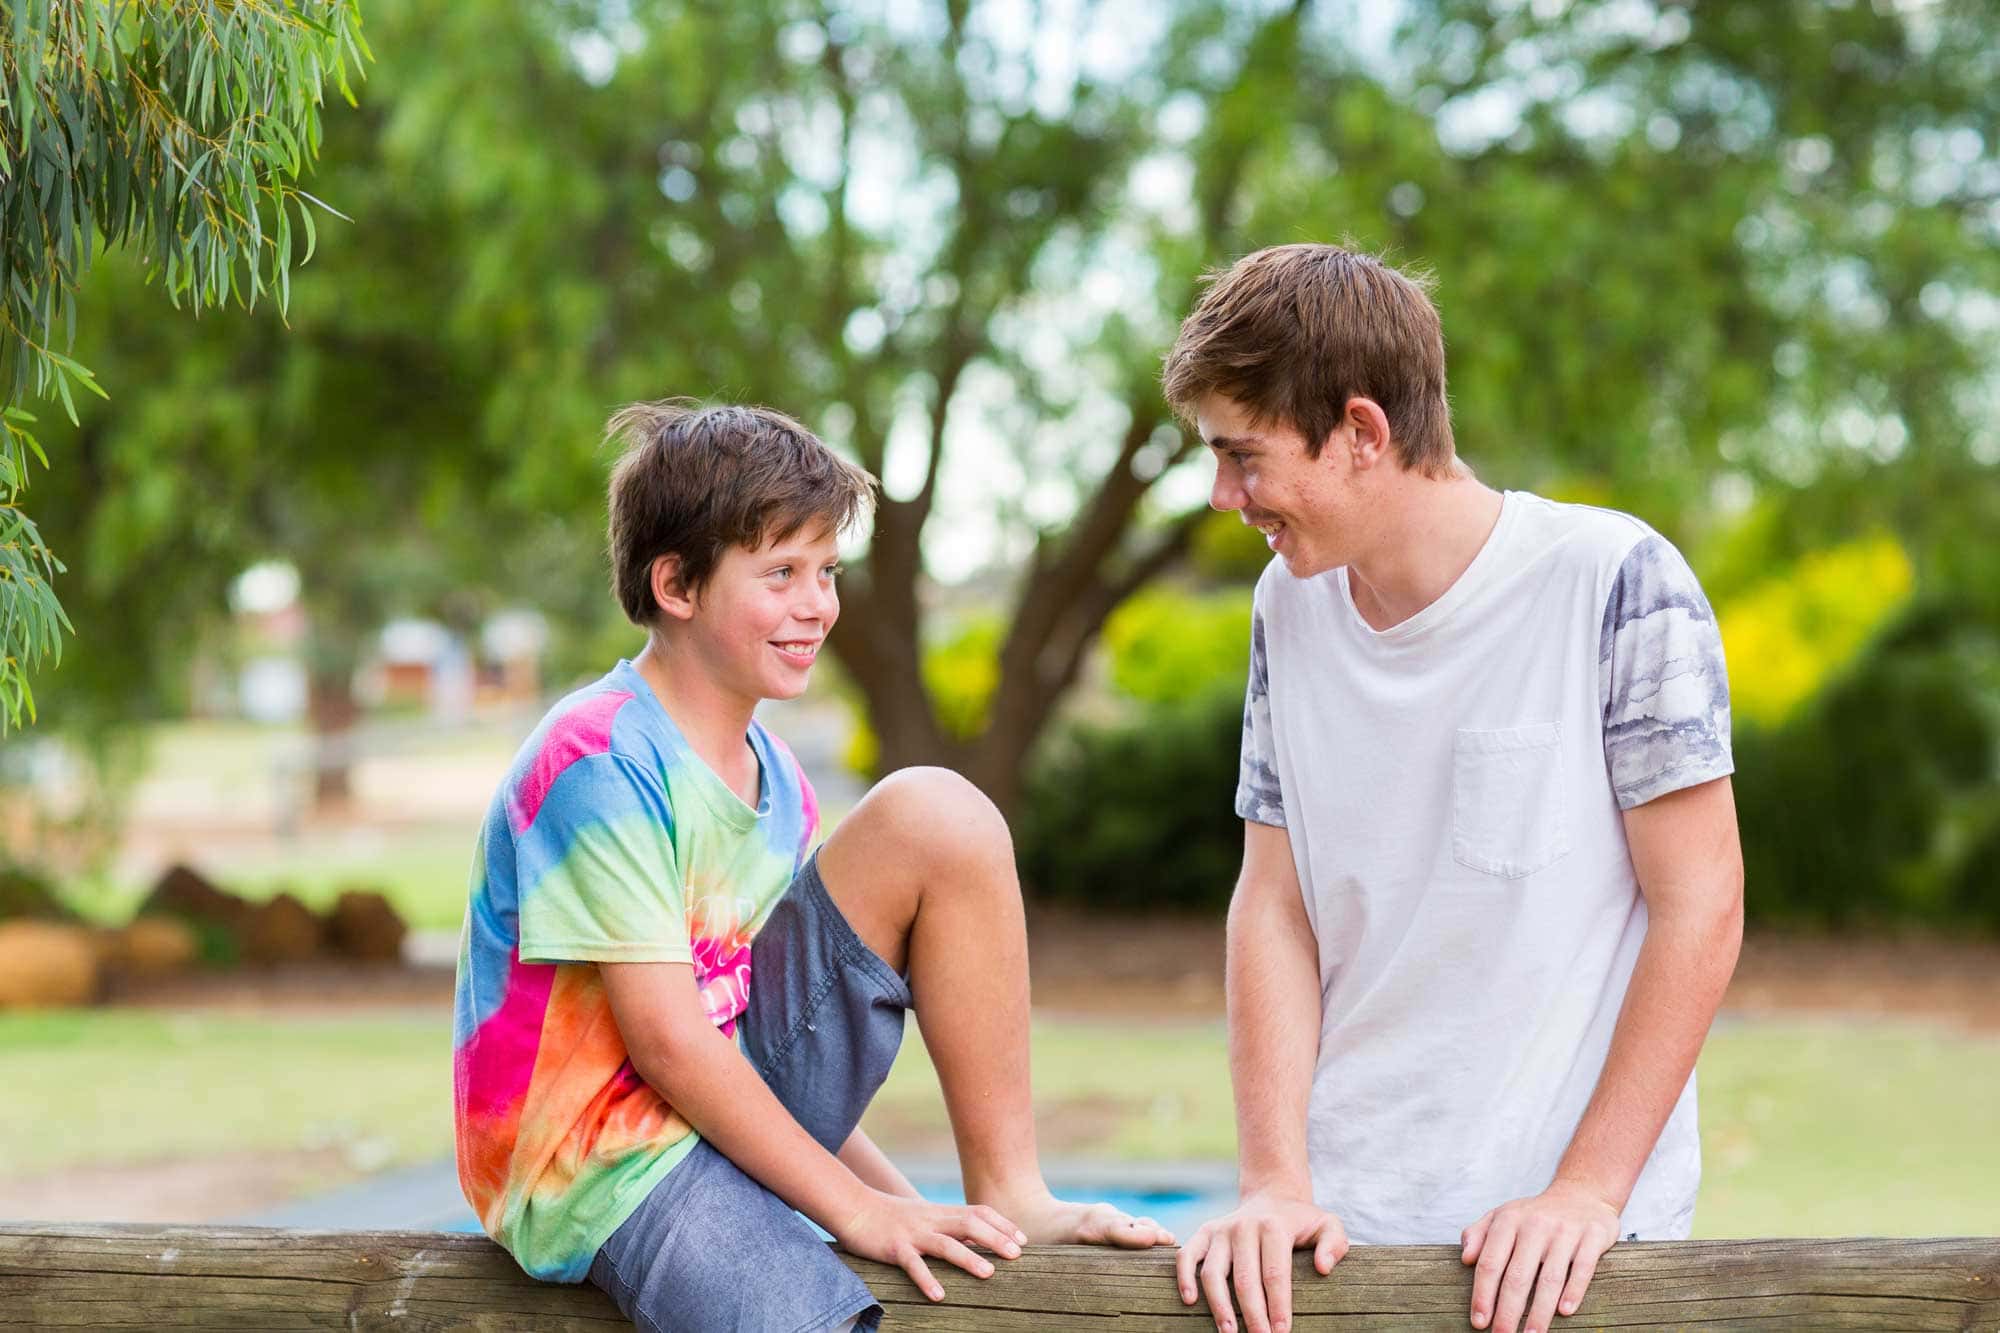 A young boy is sitting on a fence talking with his older brother who is leaning on the fence. They're both smiling.